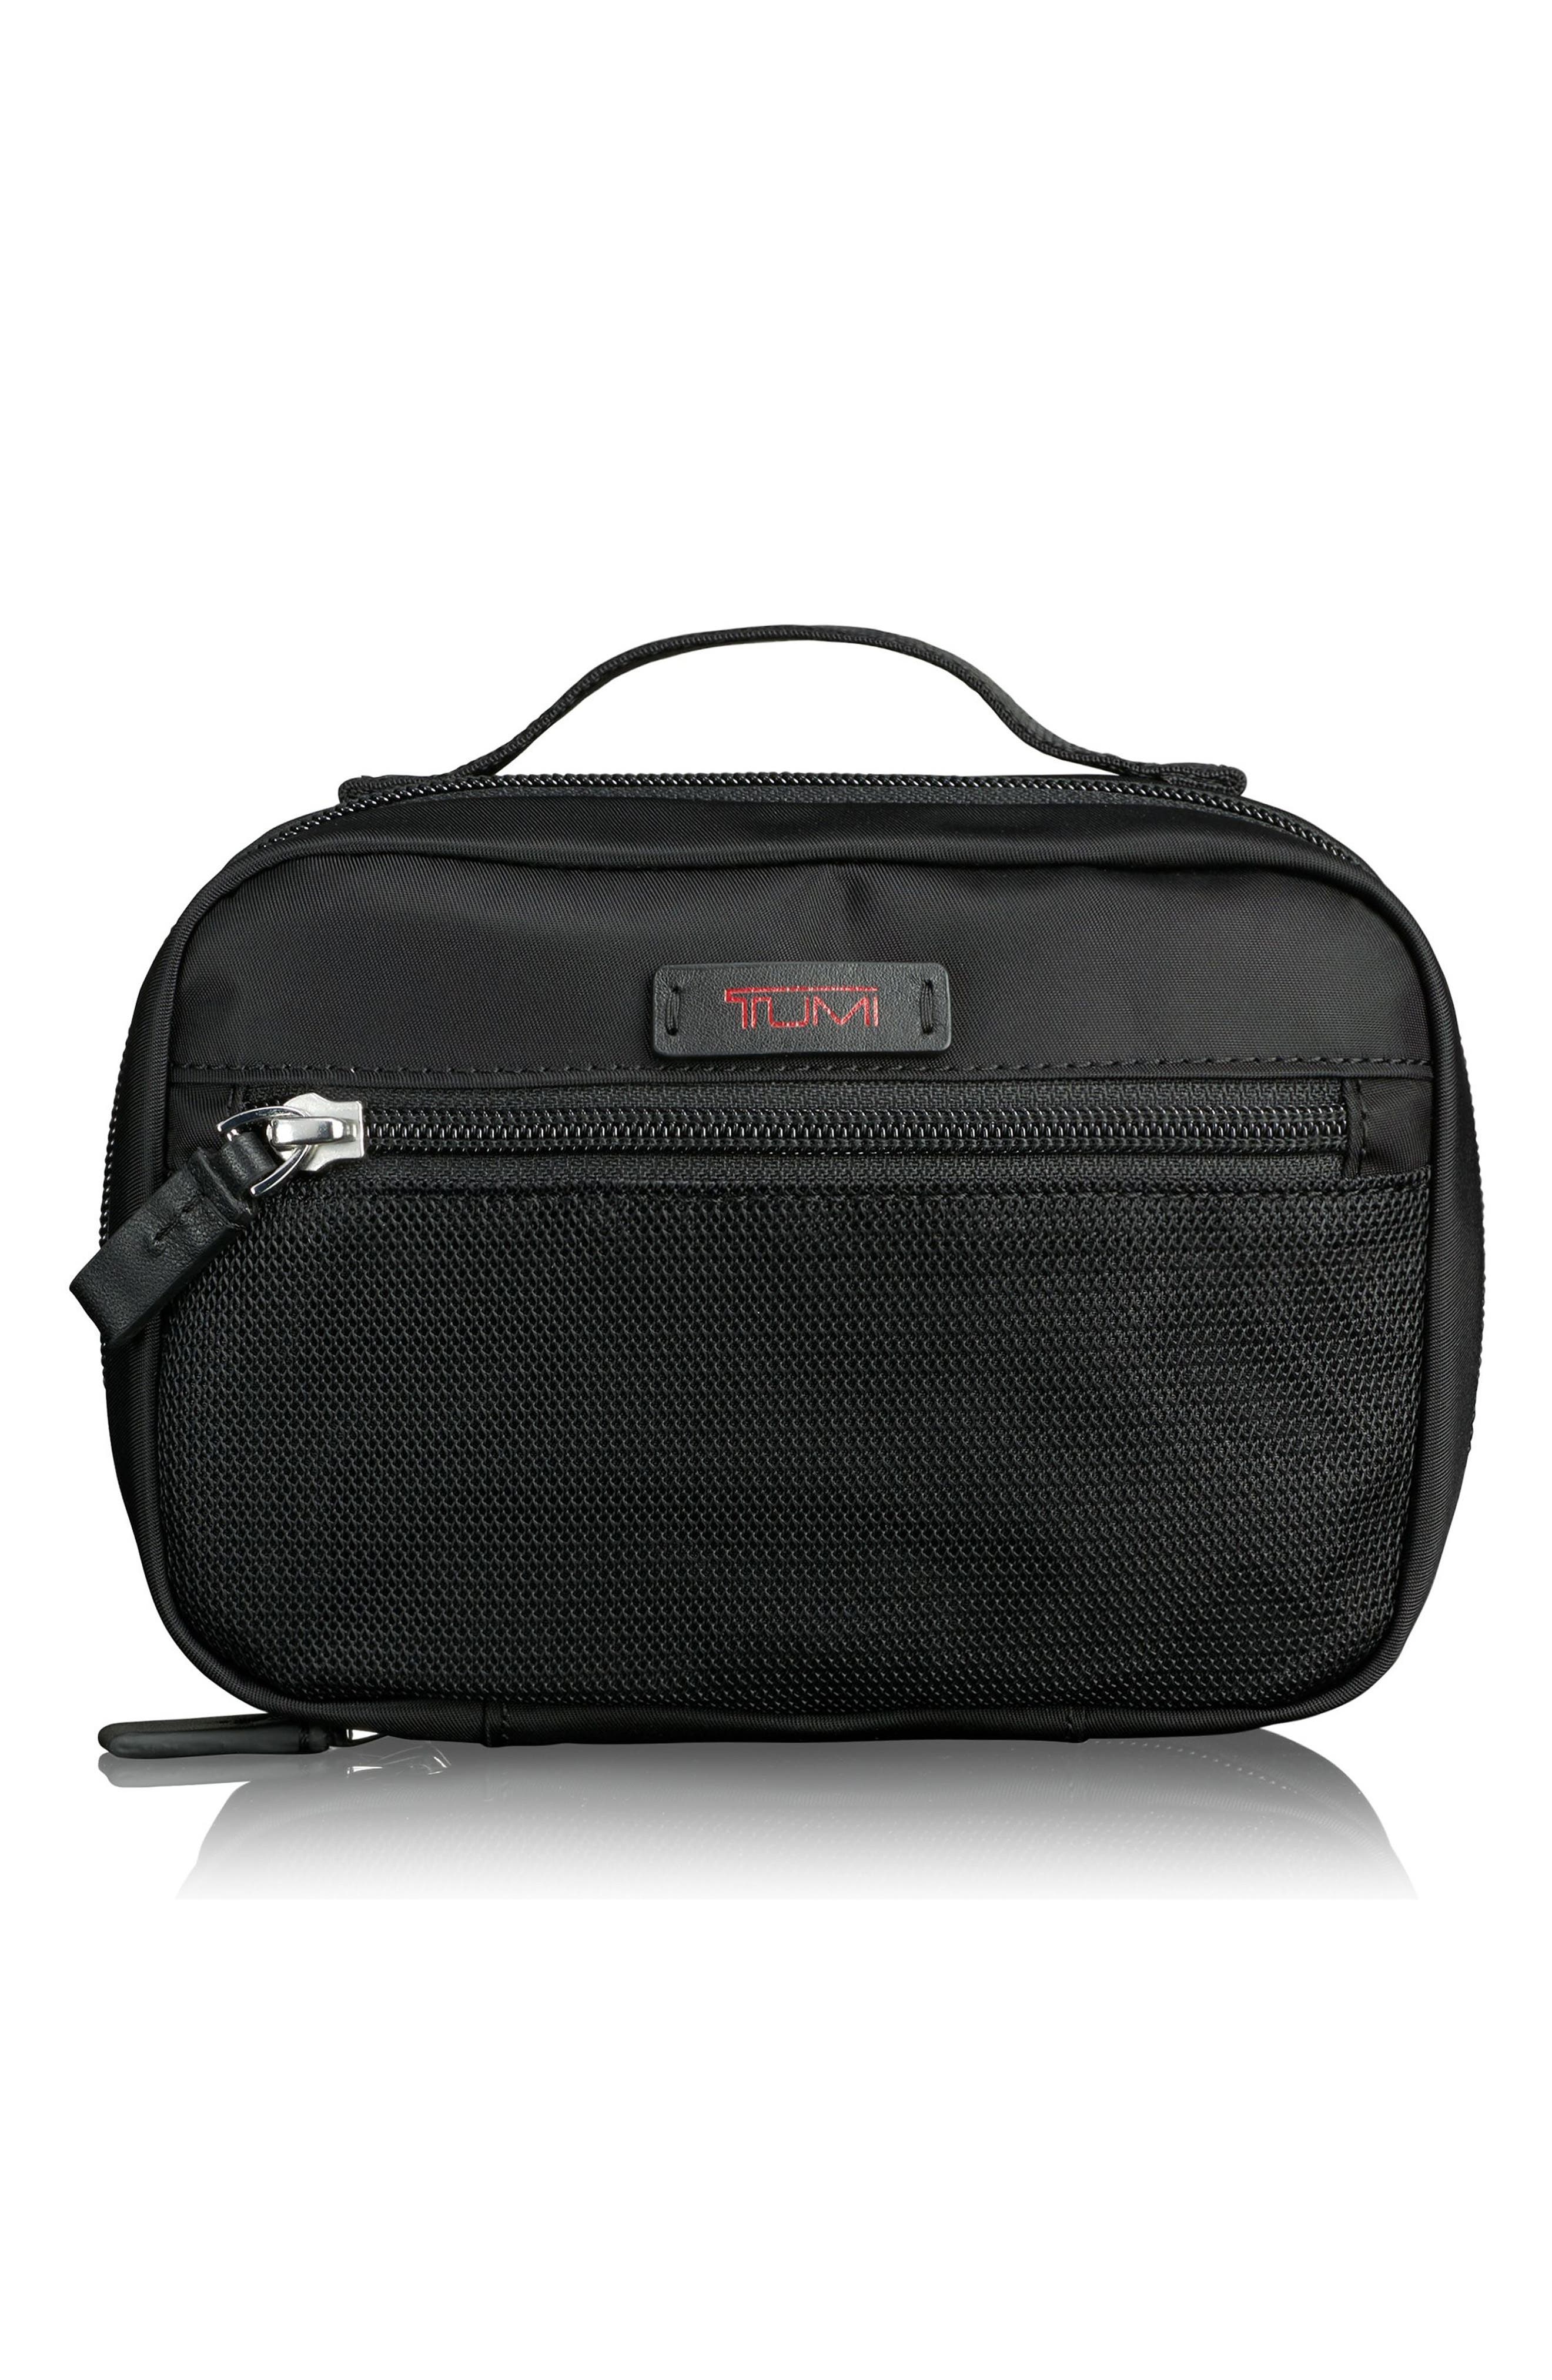 Luggage Accessories Pouch Black TUMI Travel Toiletry Bag for Men and Women Large